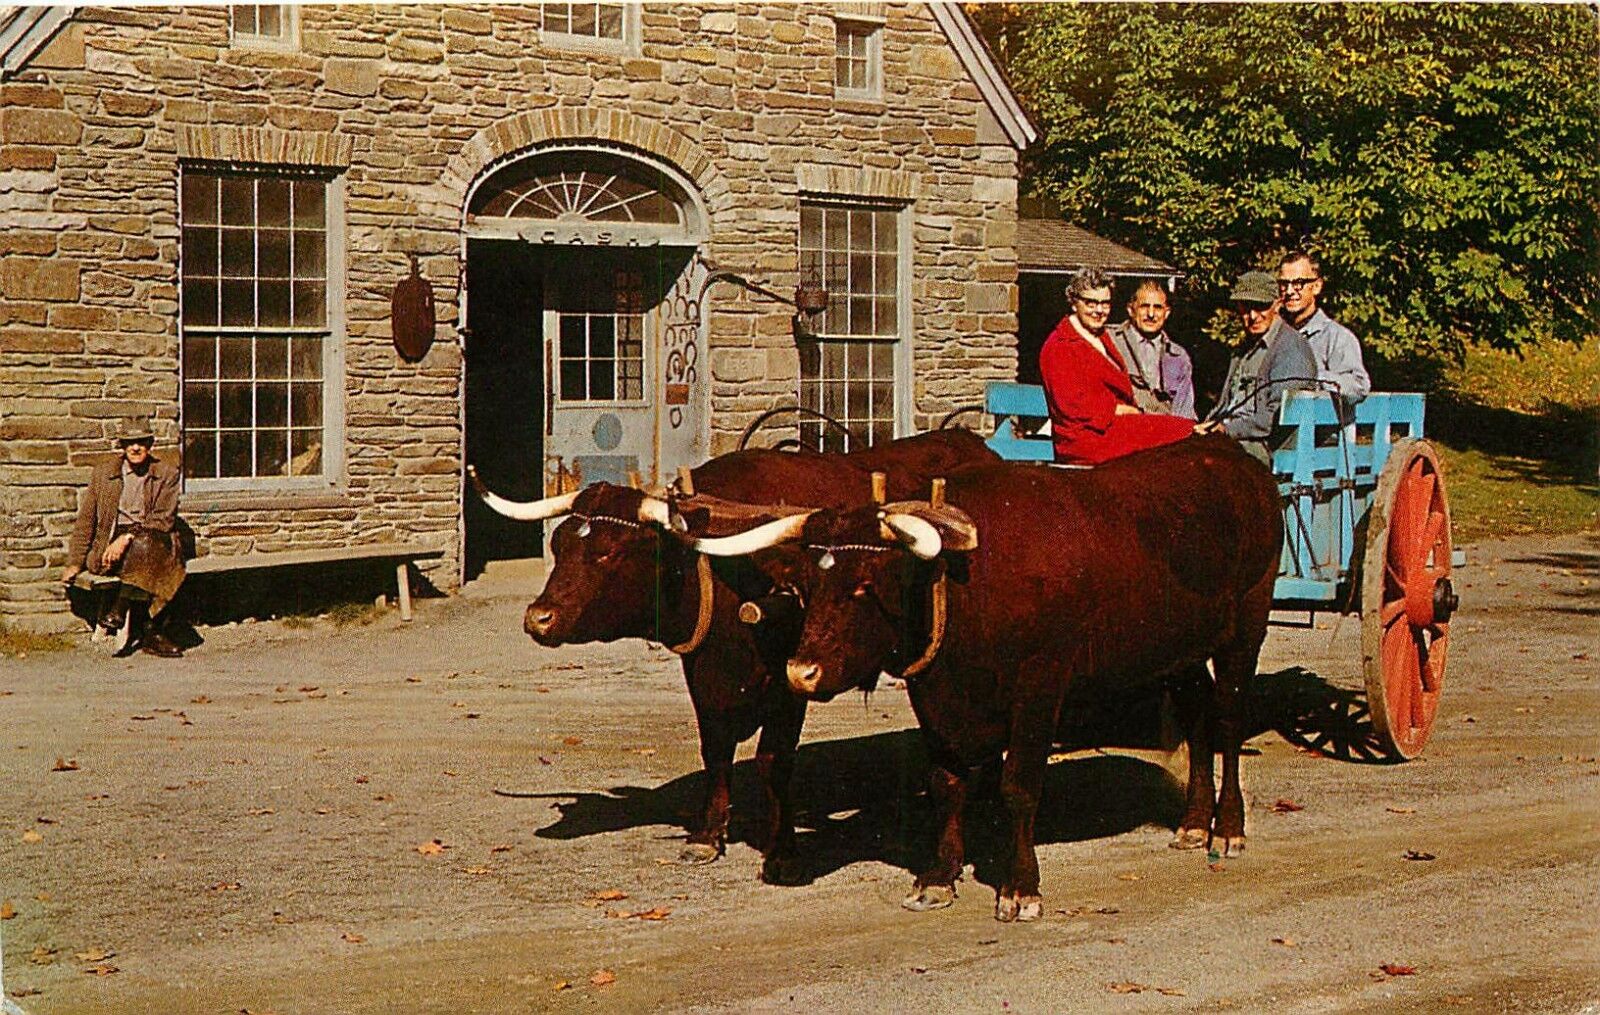 OXEN & BLACKSMITH SHOP FARMERS MUSEUM COOPERSTOWN NY POSTCARD